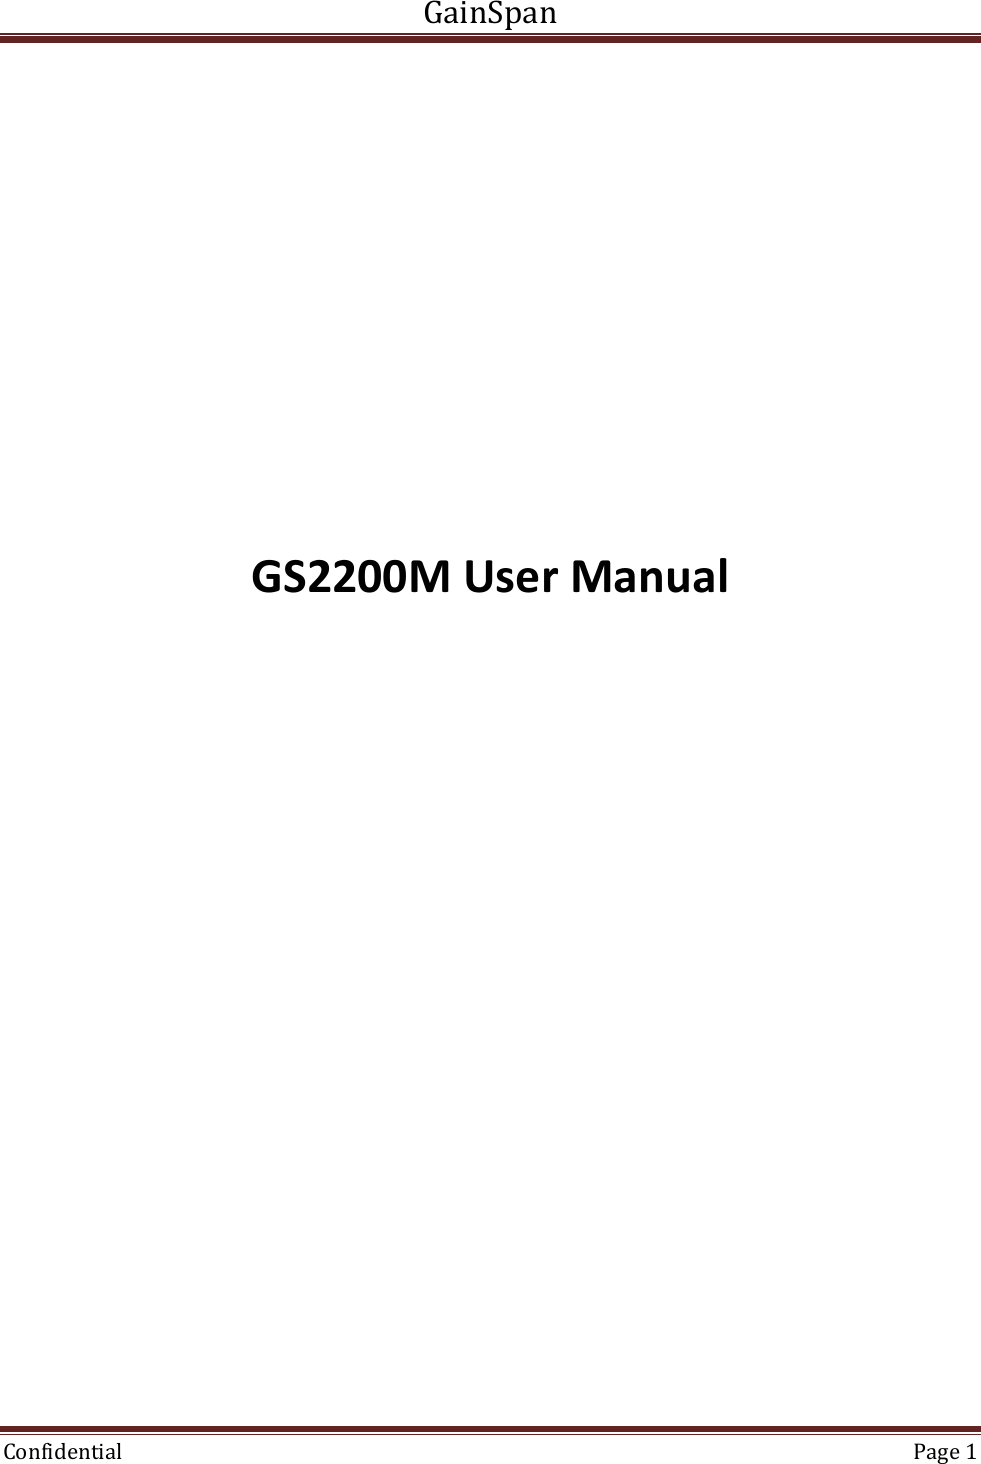 GainSpan  Confidential  Page 1             GS2200M User Manual   